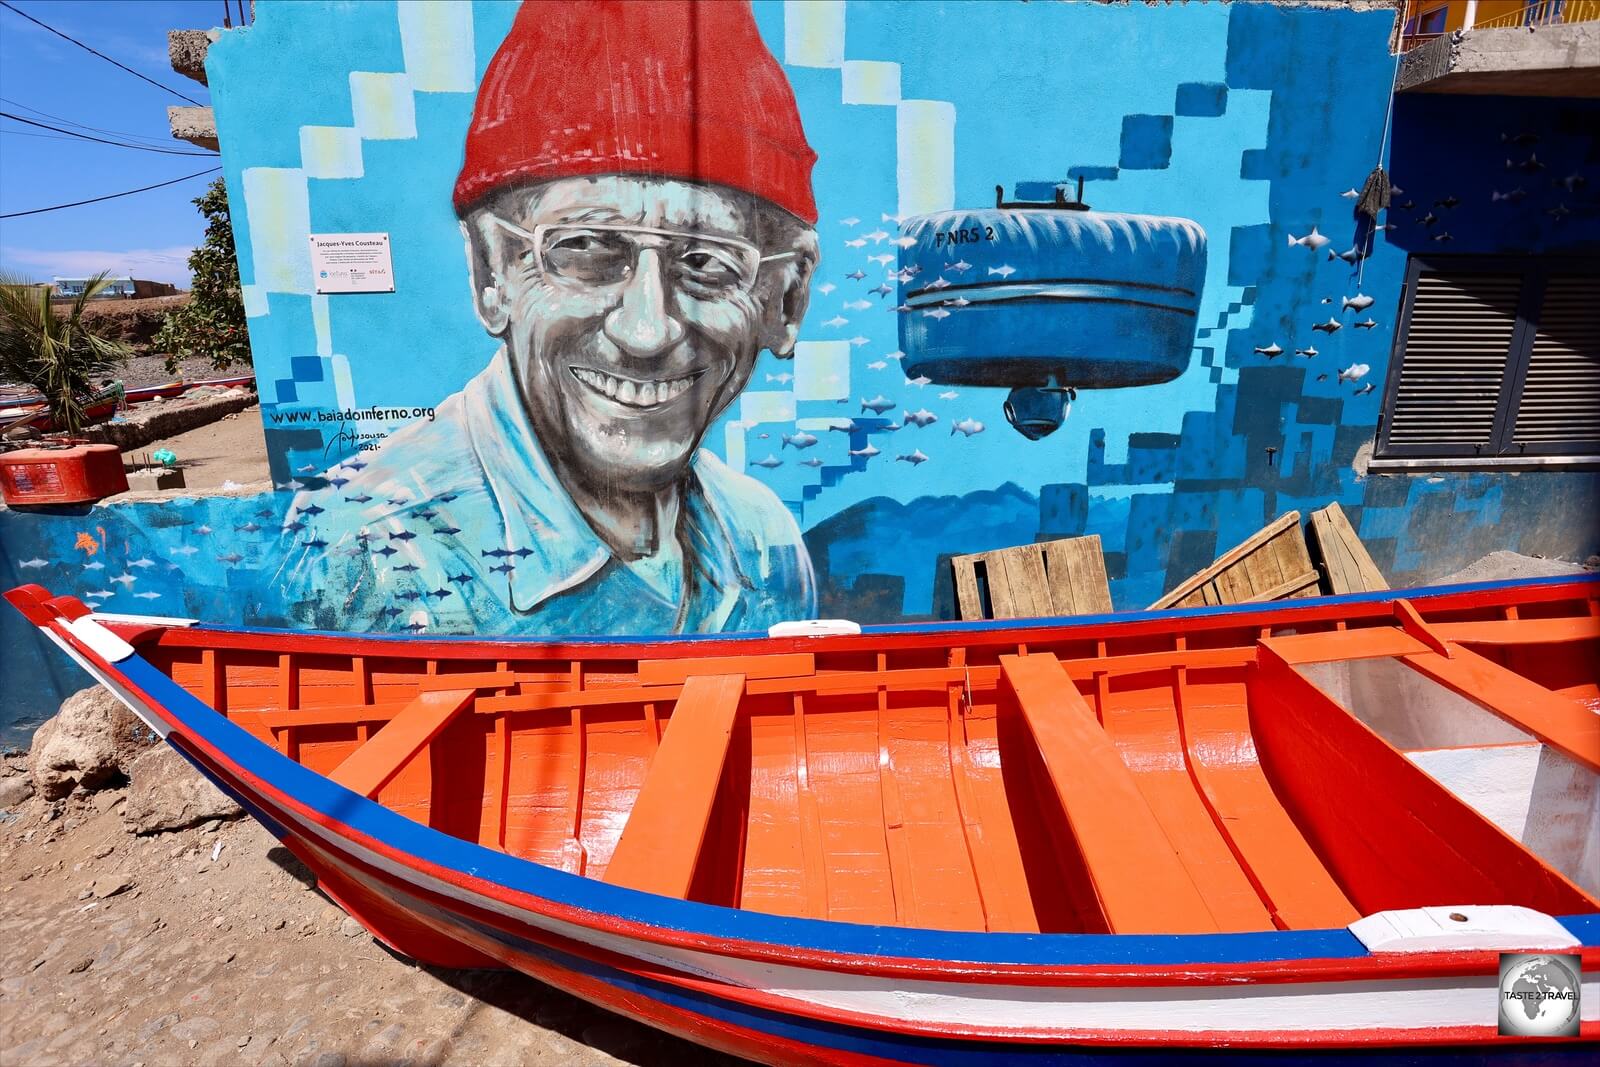 A mural in Porto Mosquito celebrates a visit by Jacques-Yves Cousteau.